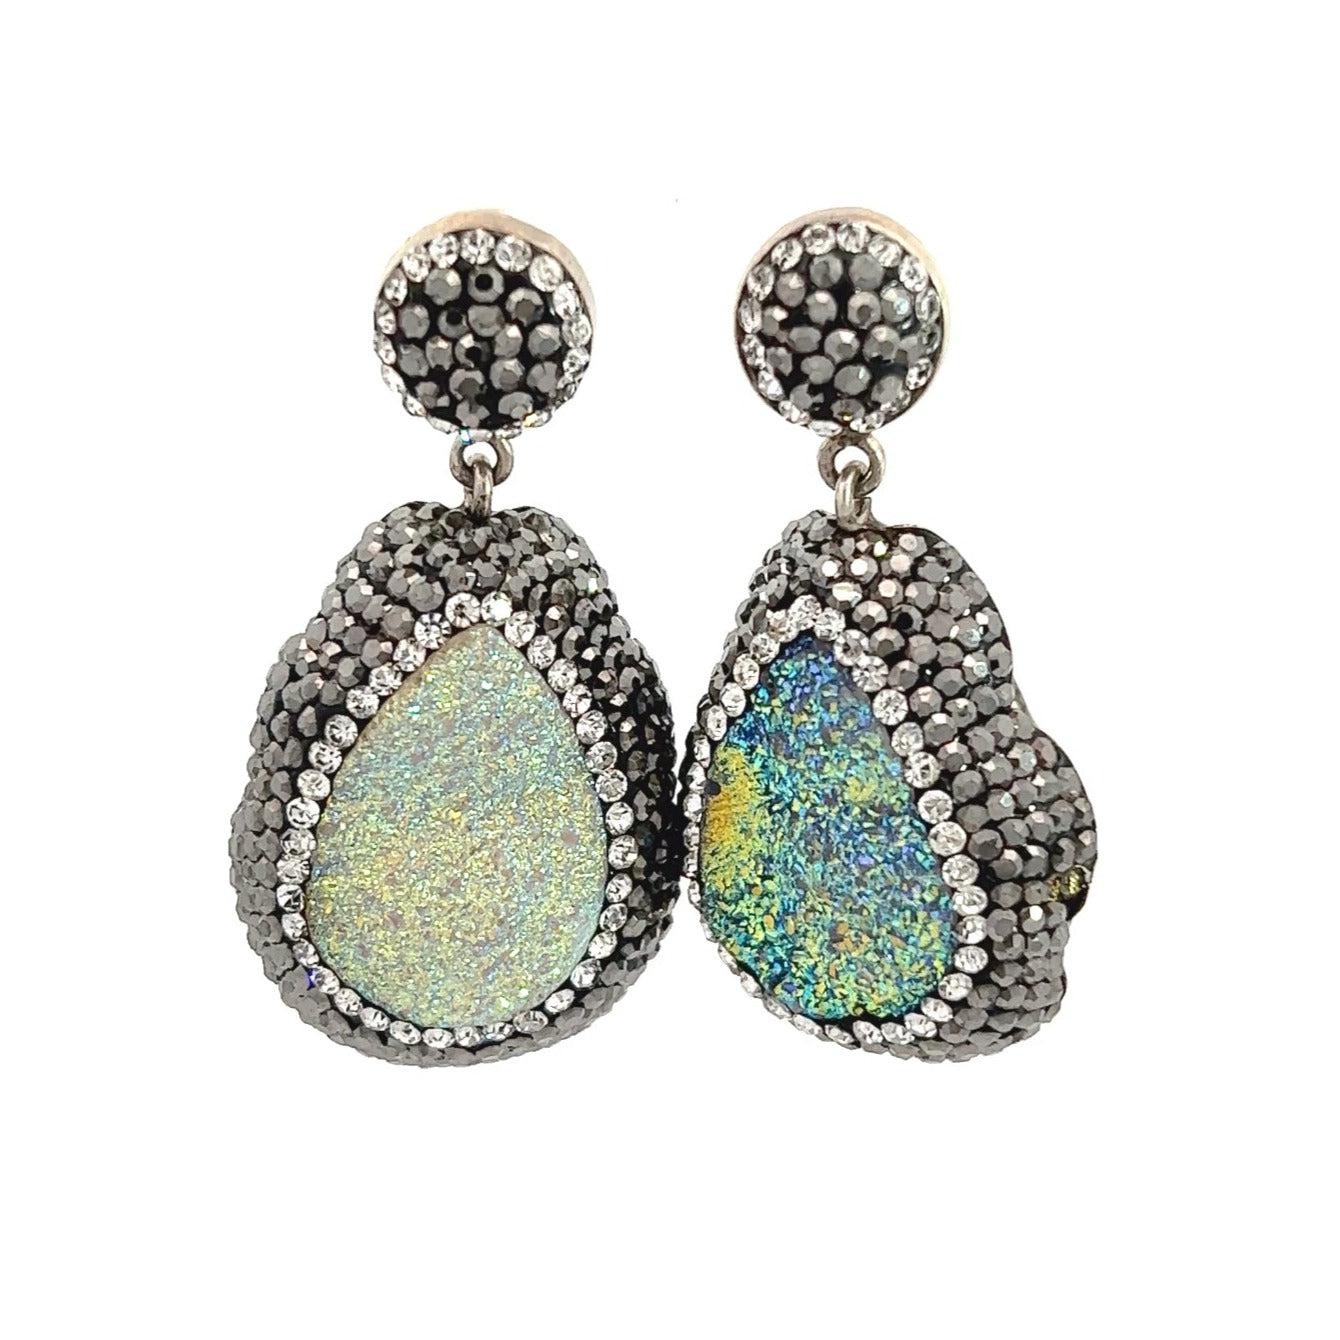 Load image into Gallery viewer, Minty Green Gemstone Dangle Earring - Born To Glam
